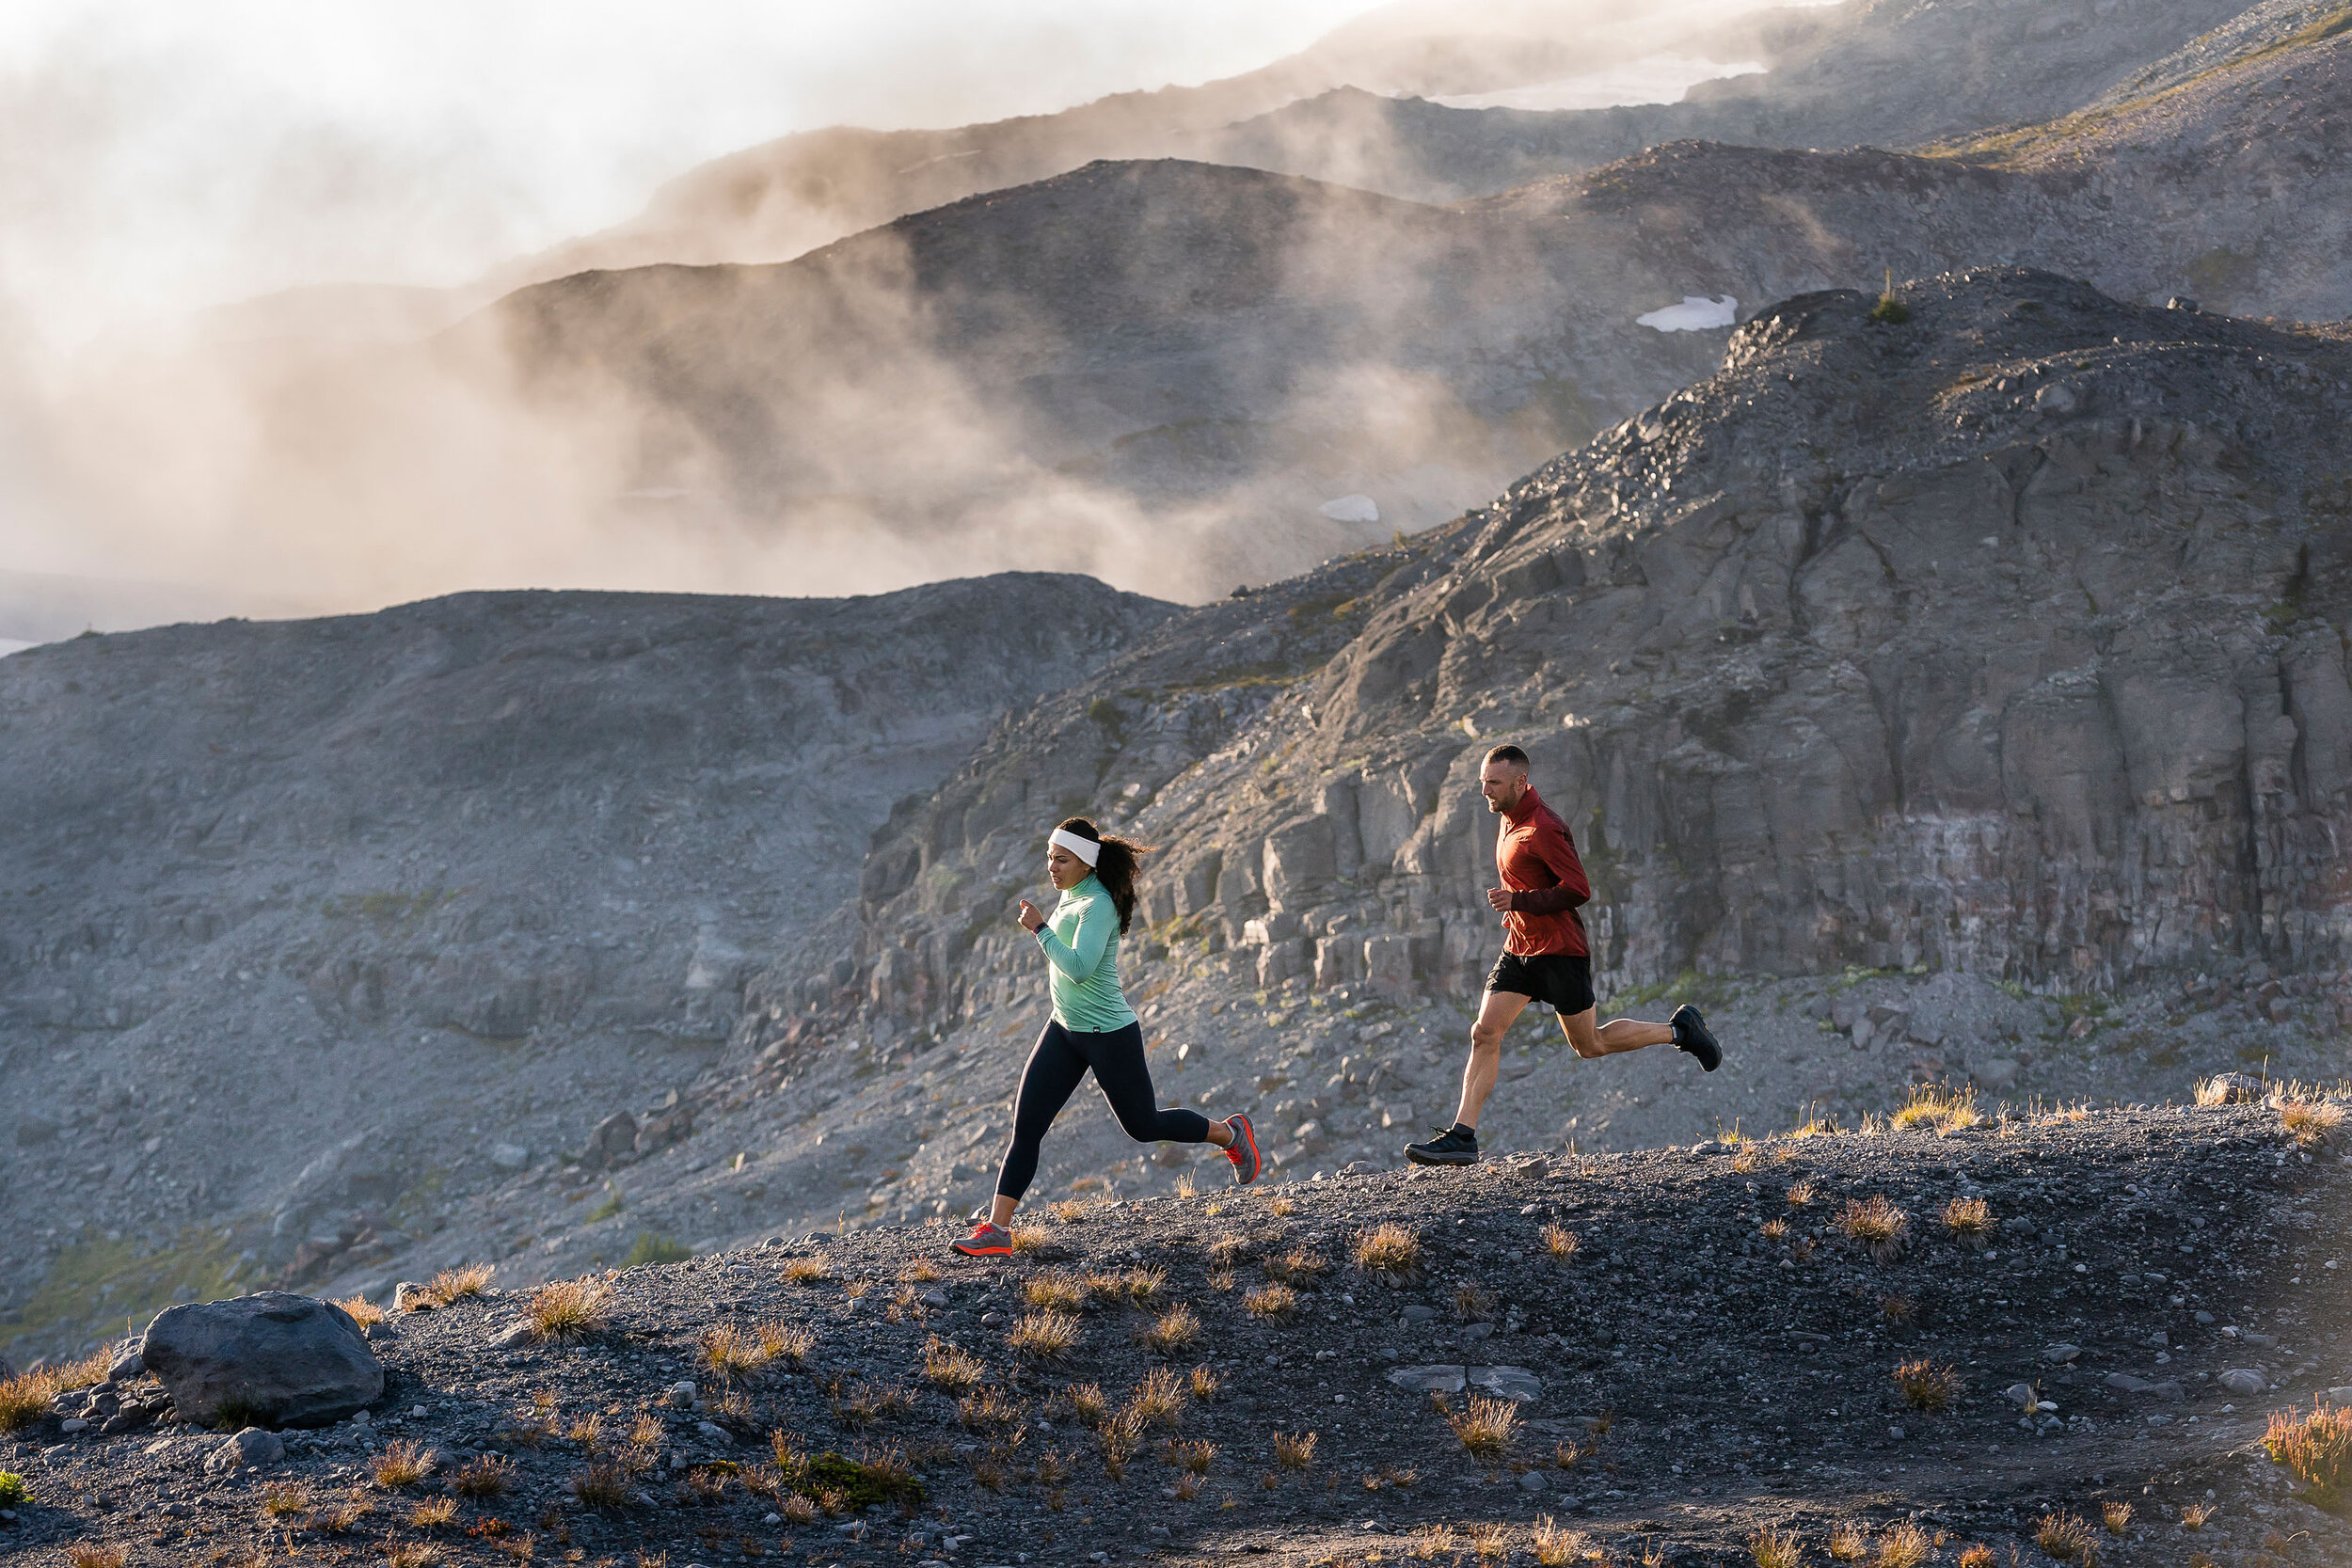  Adventure: Jennifer Forrester and Andrew O'Connor trail running in the alpine, Mt. Rainier National Park, Washington 